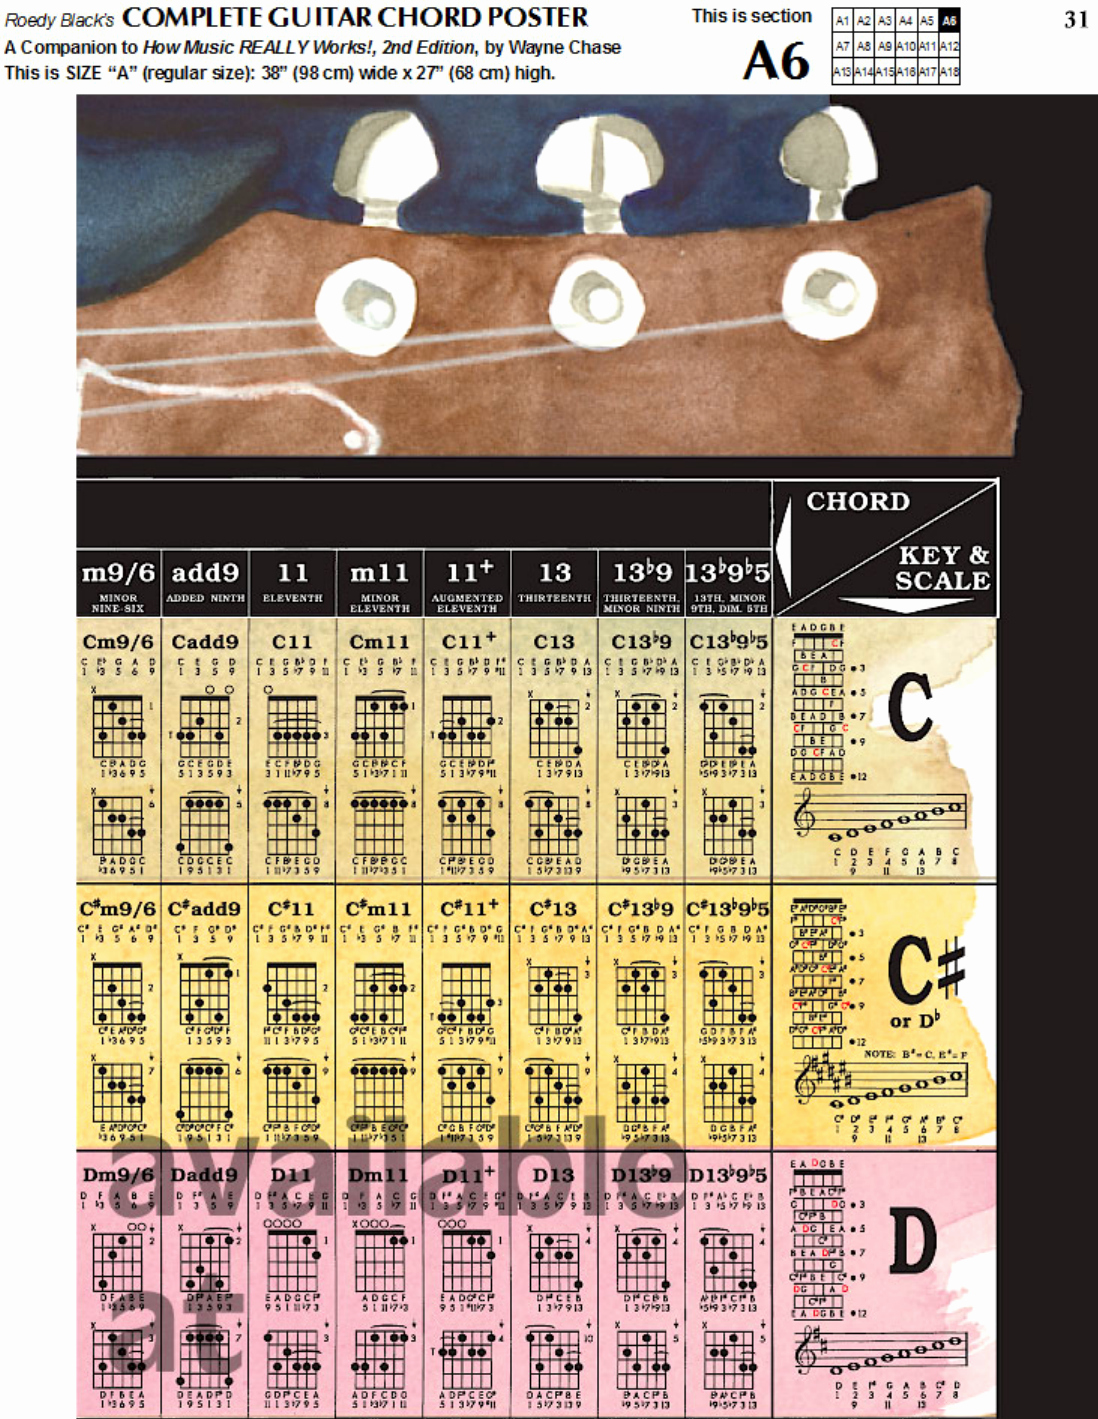 Chord Chart Guitar Complete Awesome Download Plete Guitar Chord Chart Template for Free